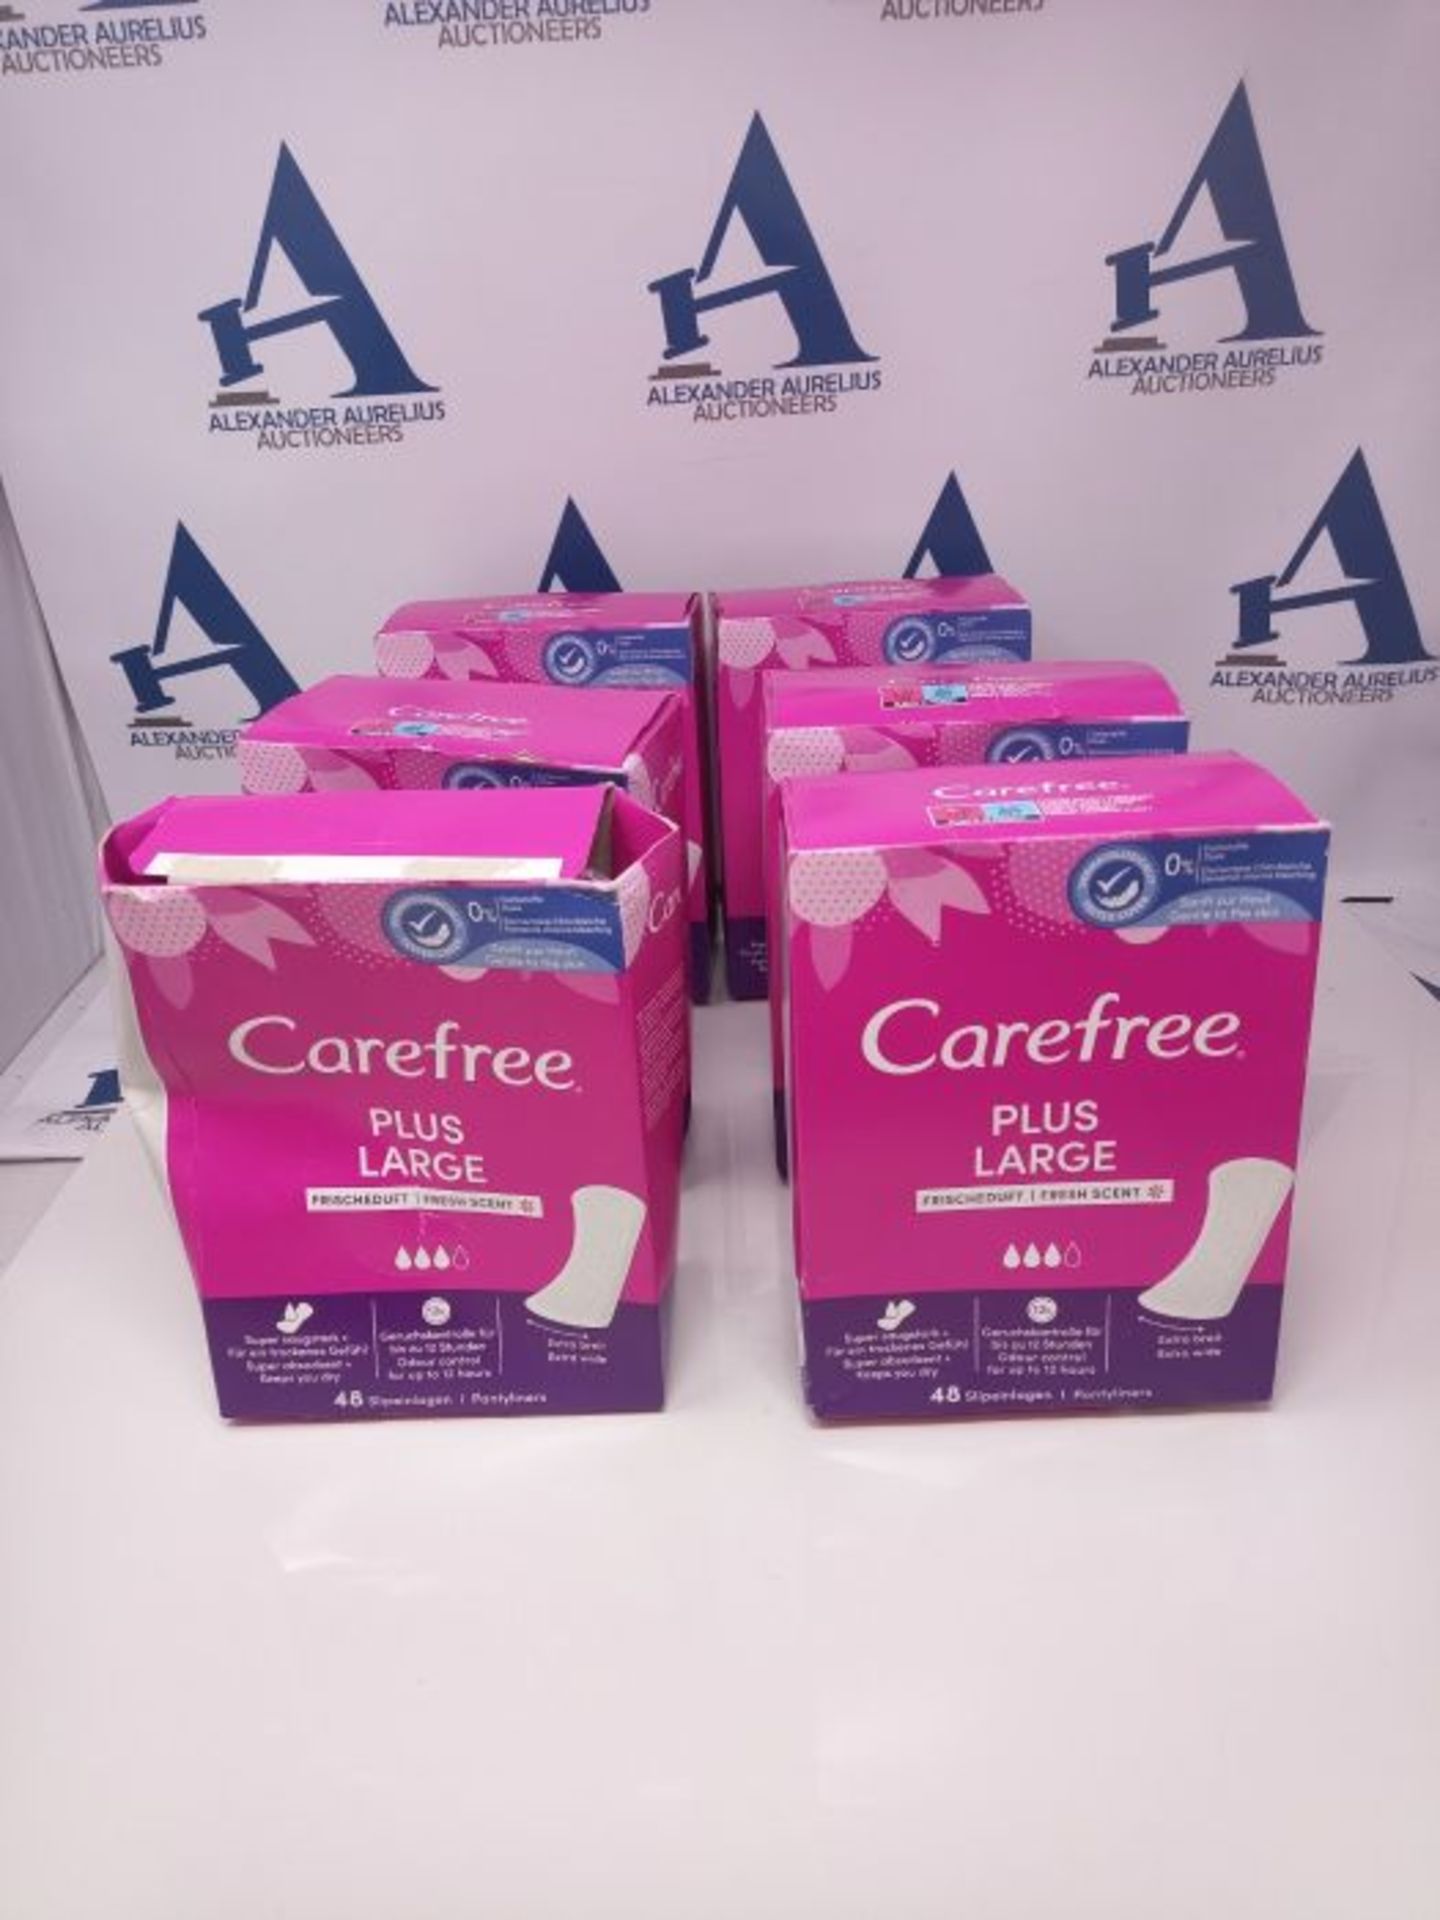 Carefree Panty liners Plus Large with fresh fragrance, particularly absorbent and addi - Image 2 of 3